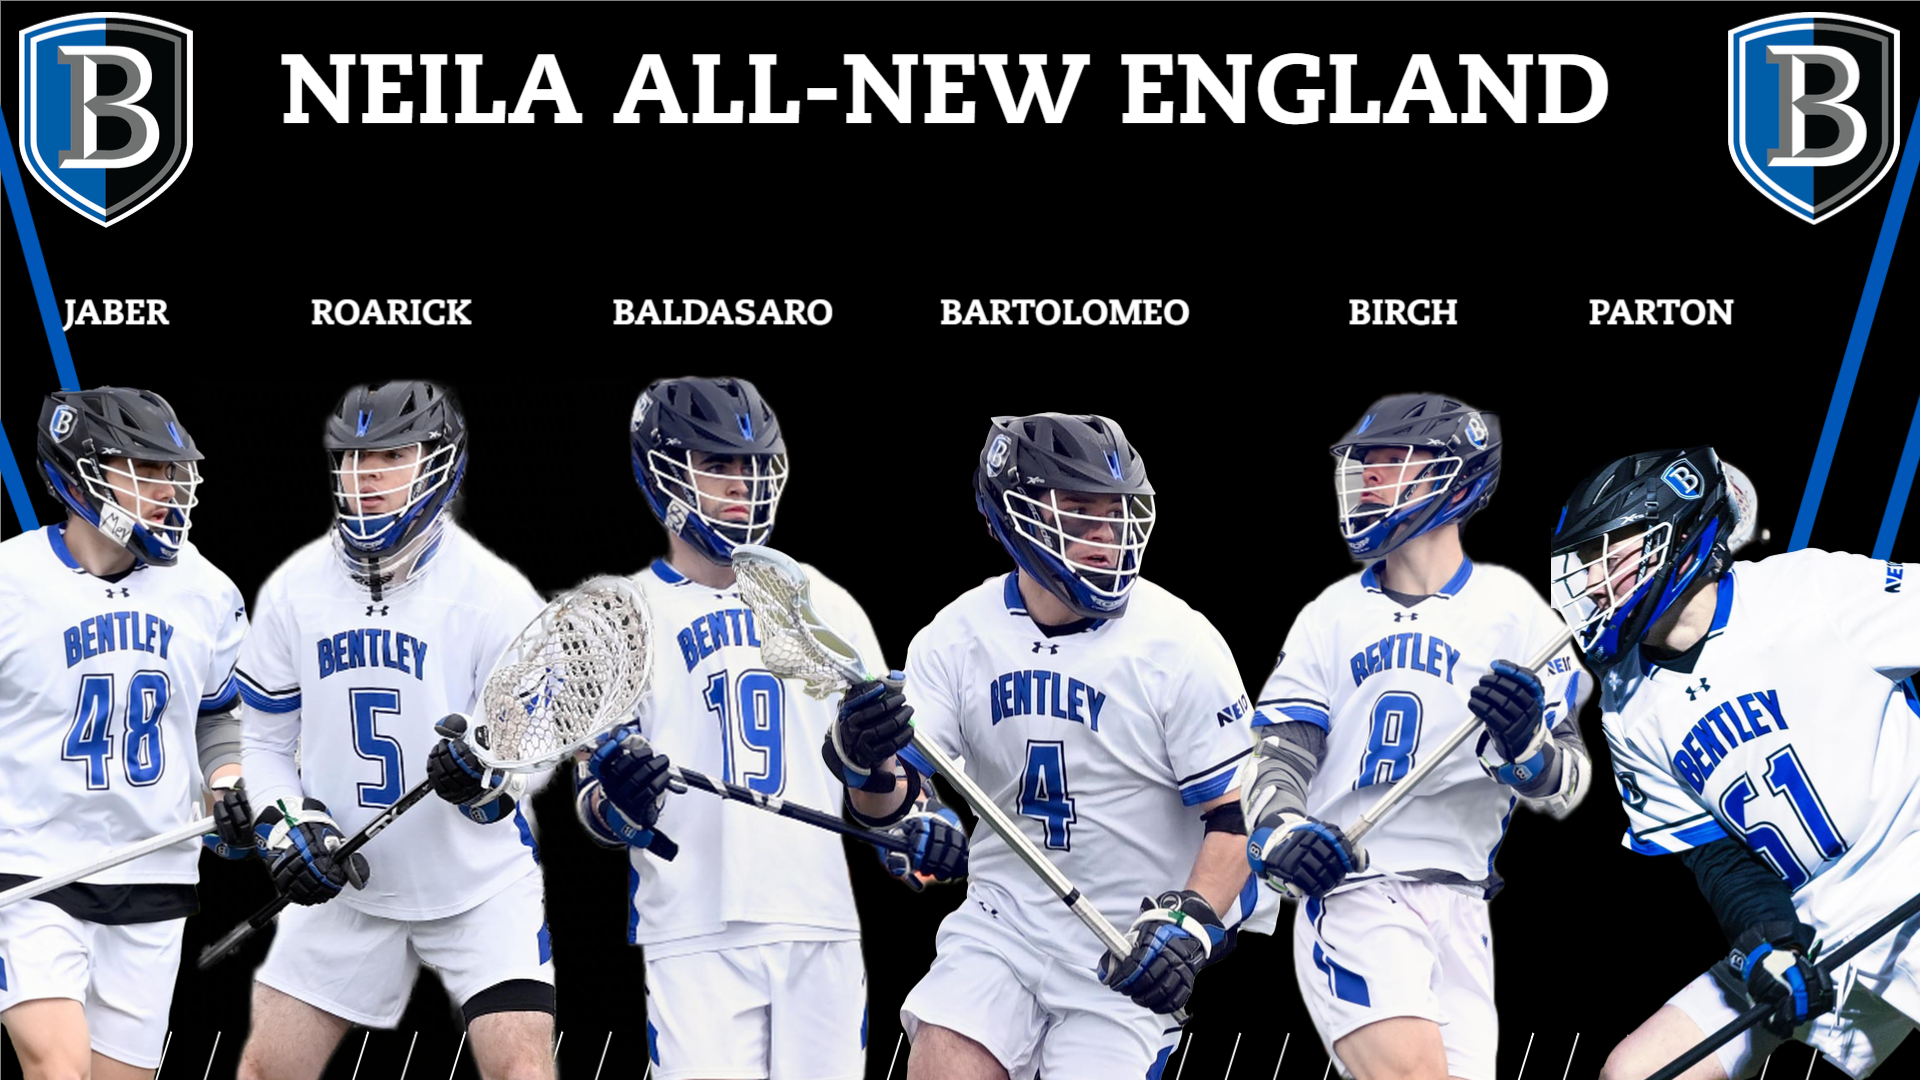 Six Bentley Players Named to NEILA All-New England Teams